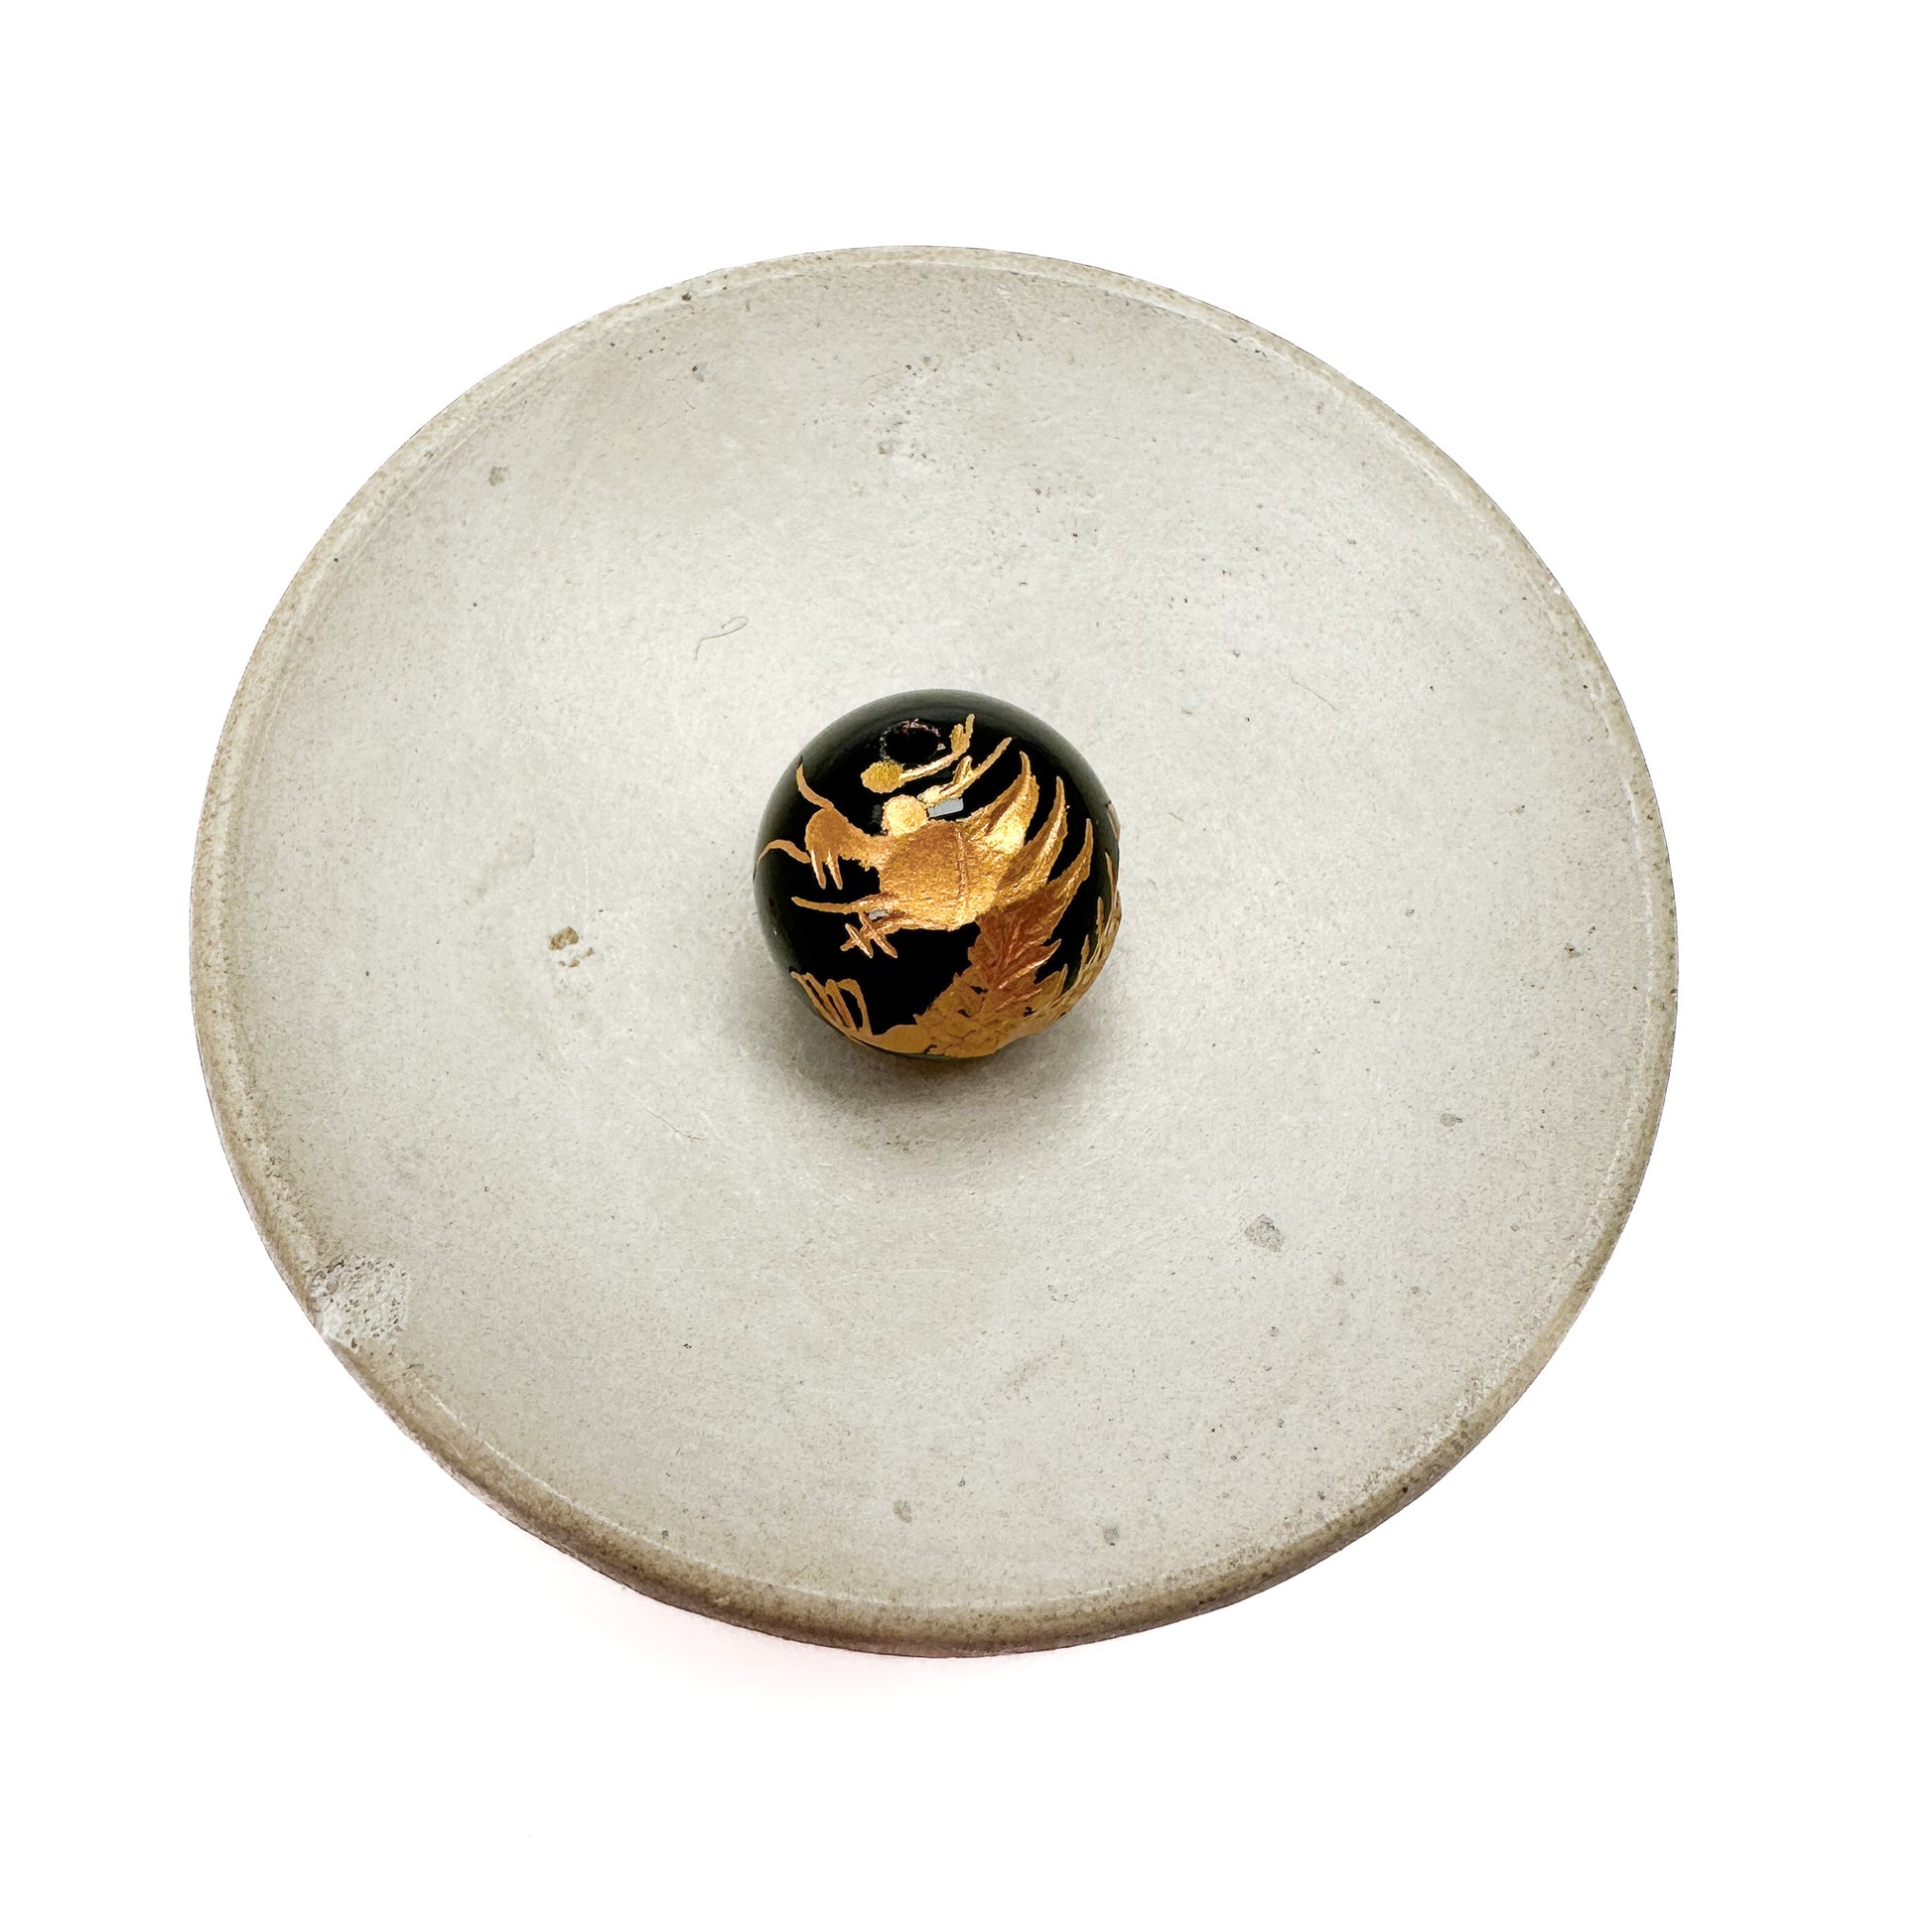 gold dragon on black agate; 16mm; smooth; round; carved - 1 pc.-The Bead Gallery Honolulu